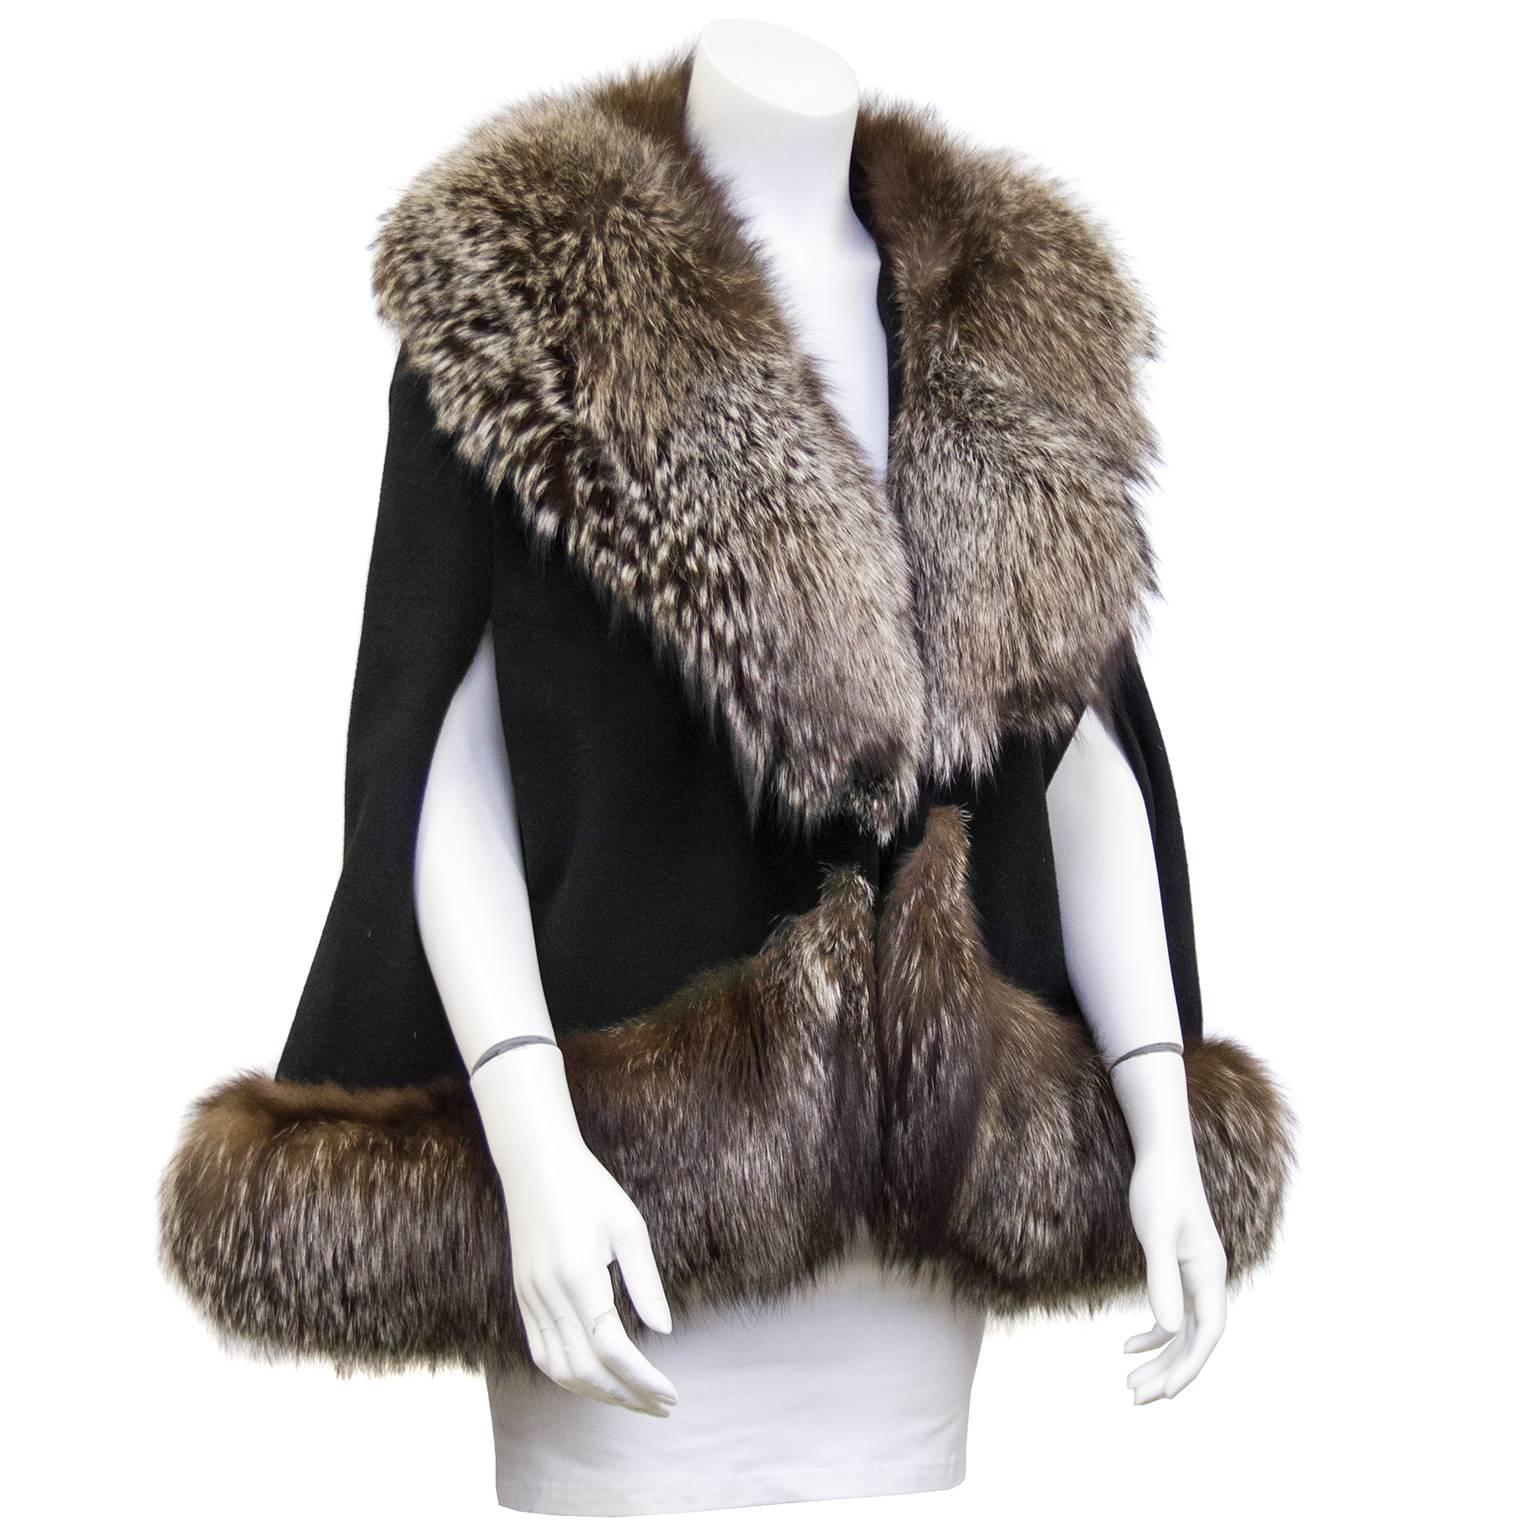 Stunning 1970's short black wool cape with large brown/grey fox fur trim. Large fur hook closure. Perfect for a winter evening. Excellent vintage condition. Fits a US 2-8.

Shoulder 20